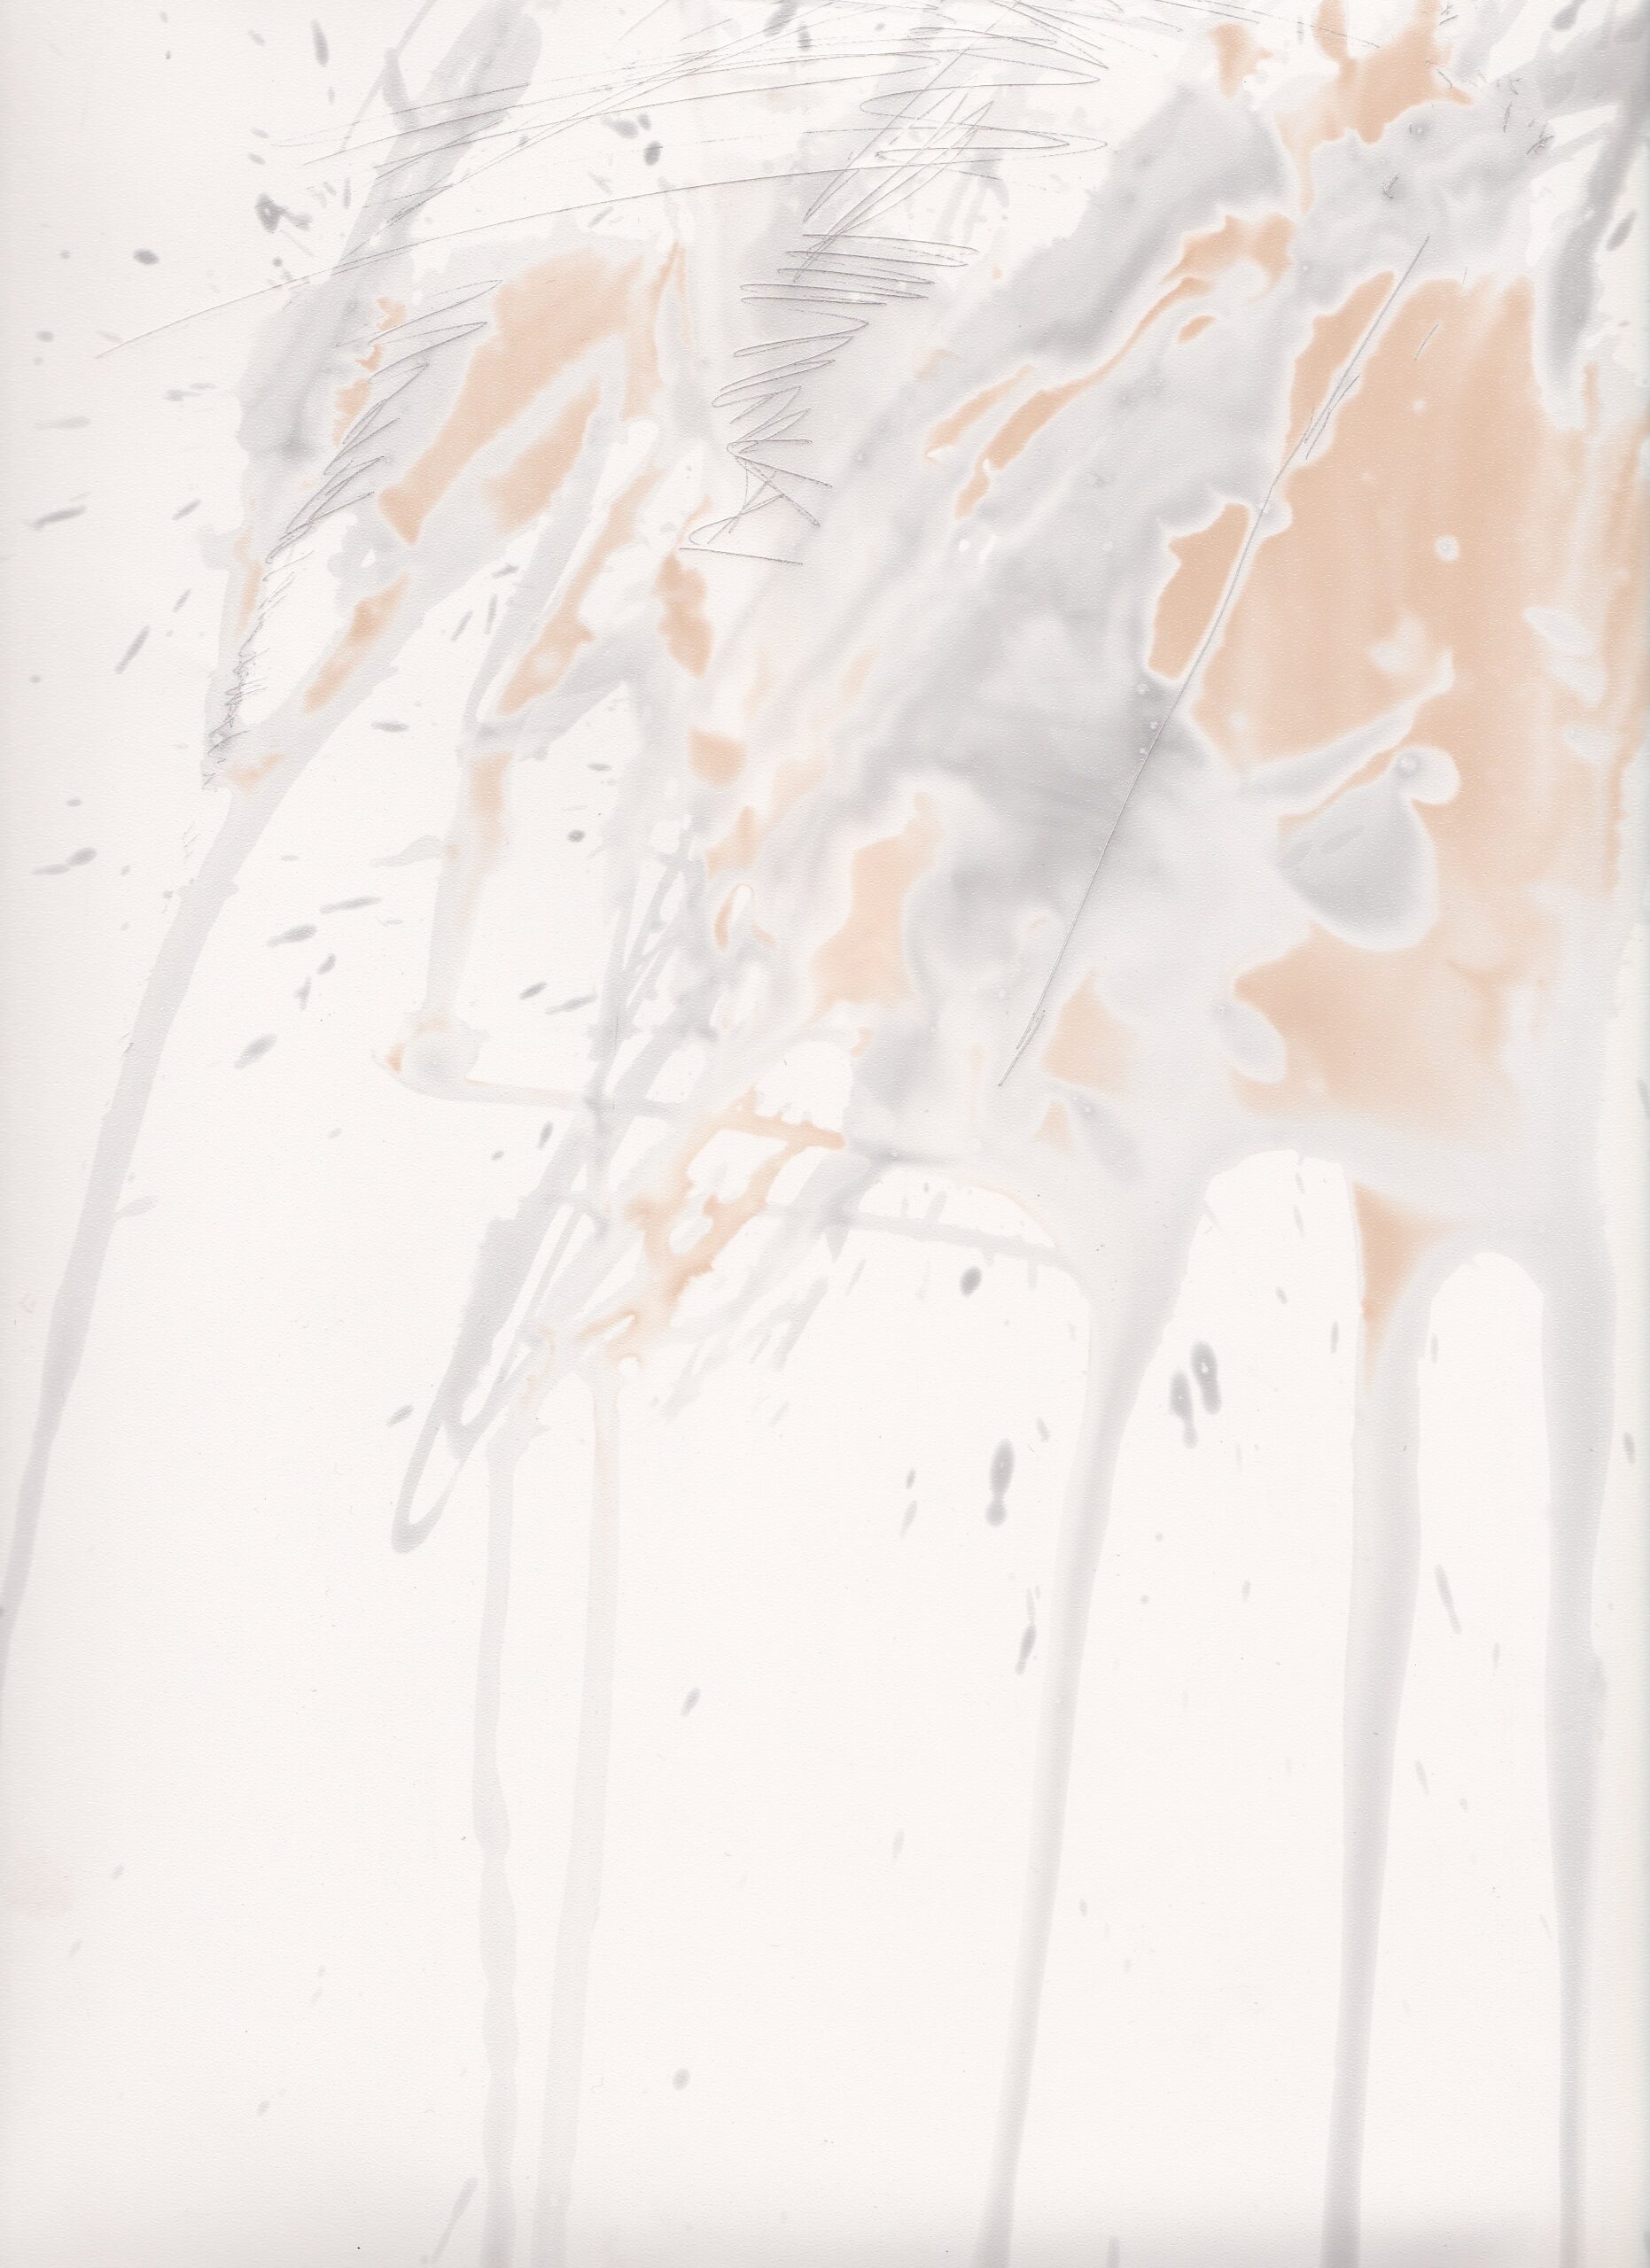 Photograph of drawing showing splashes and drips in grey and beige.